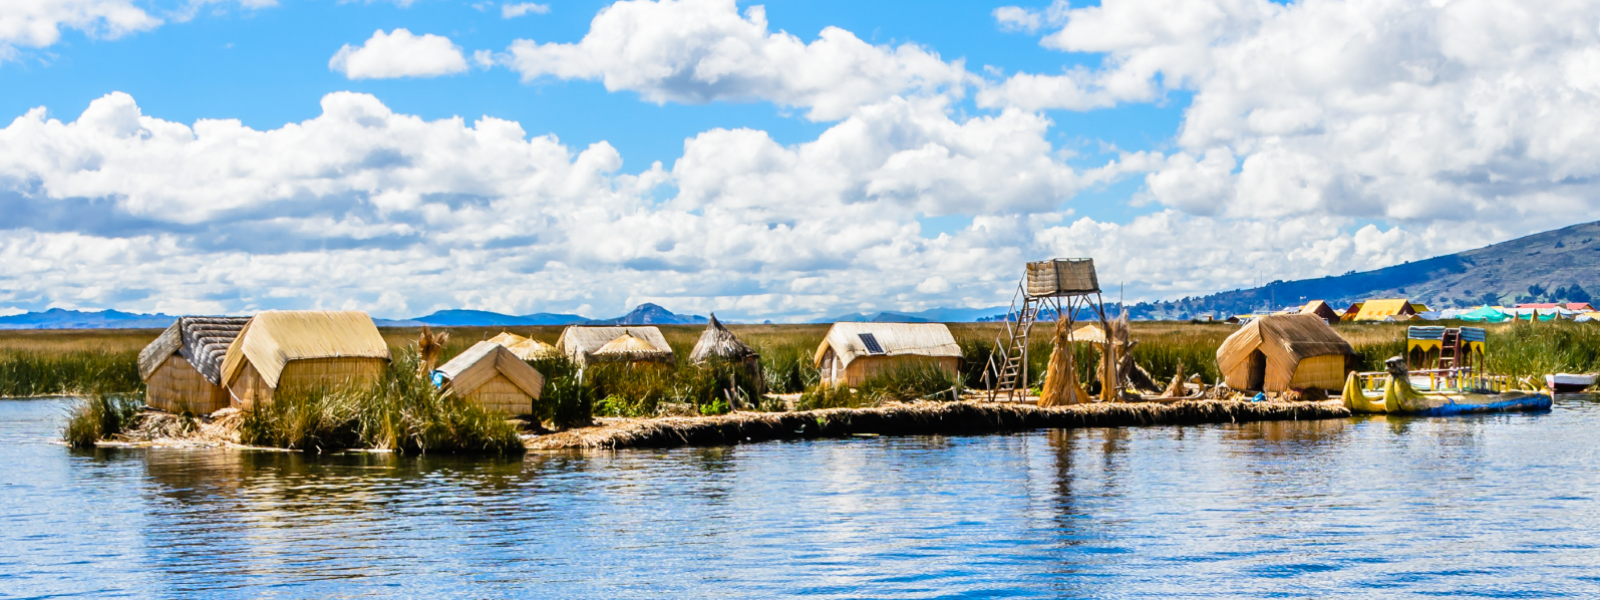 Traditional village on floating Uros  islands on lake Titicaca near city of Puno, Peru.